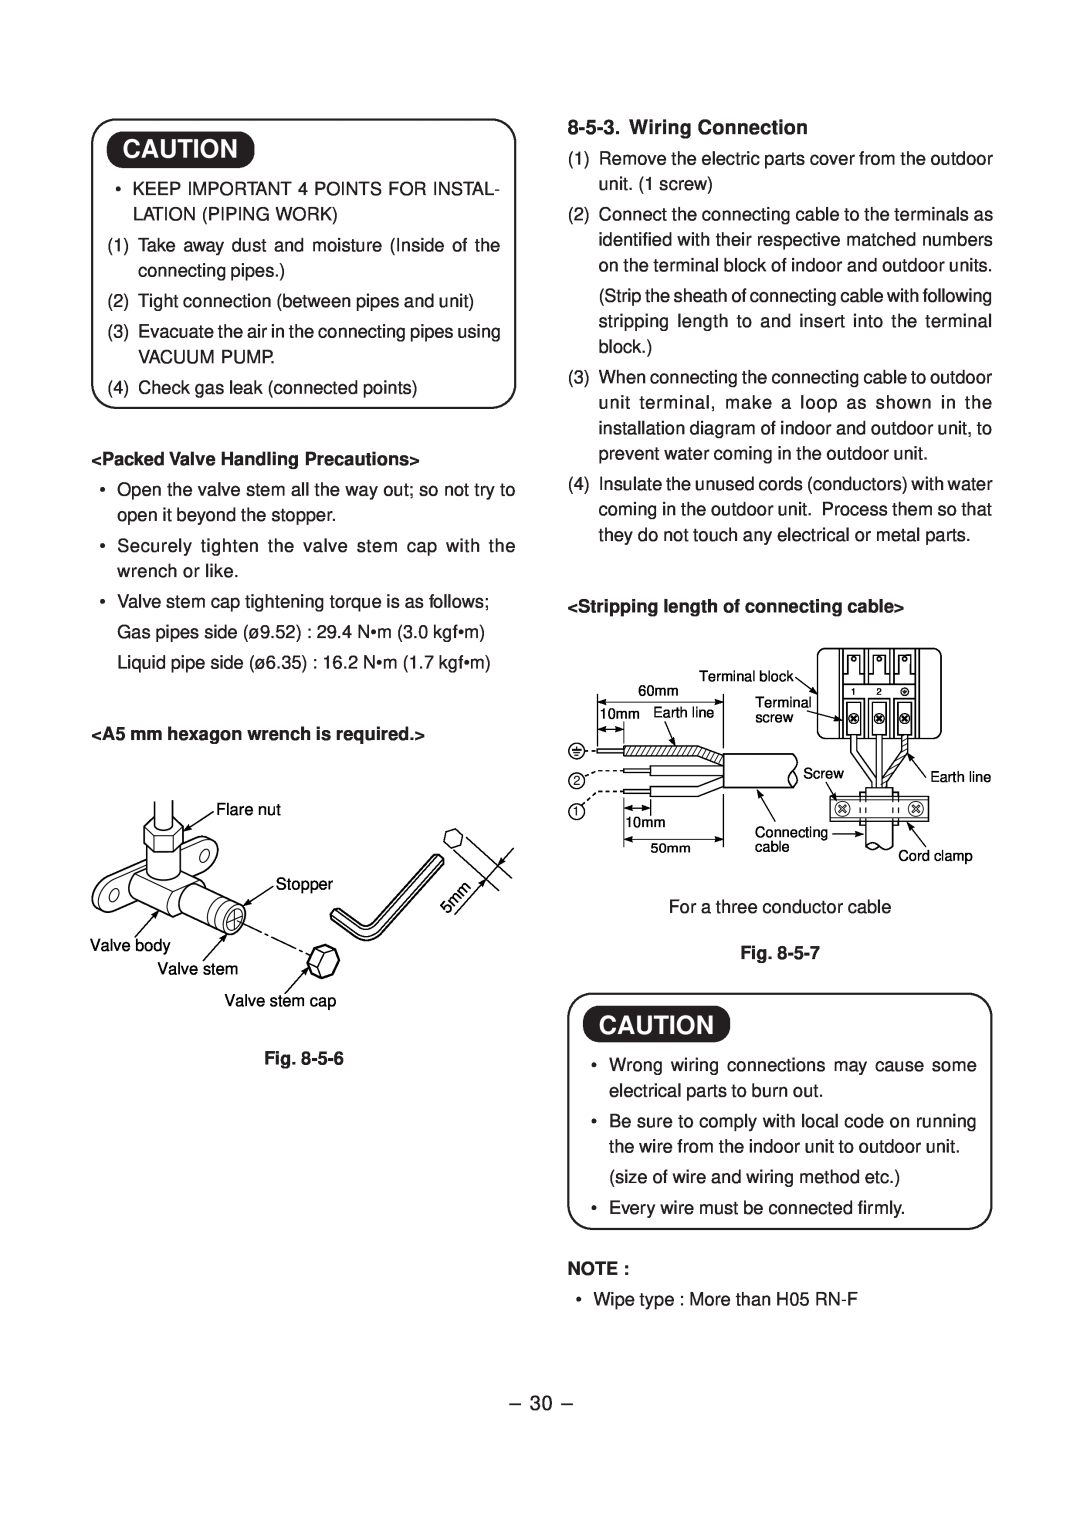 Toshiba RAS-10SK-E, RAS-10SKX Wiring Connection, Packed Valve Handling Precautions, A5 mm hexagon wrench is required 